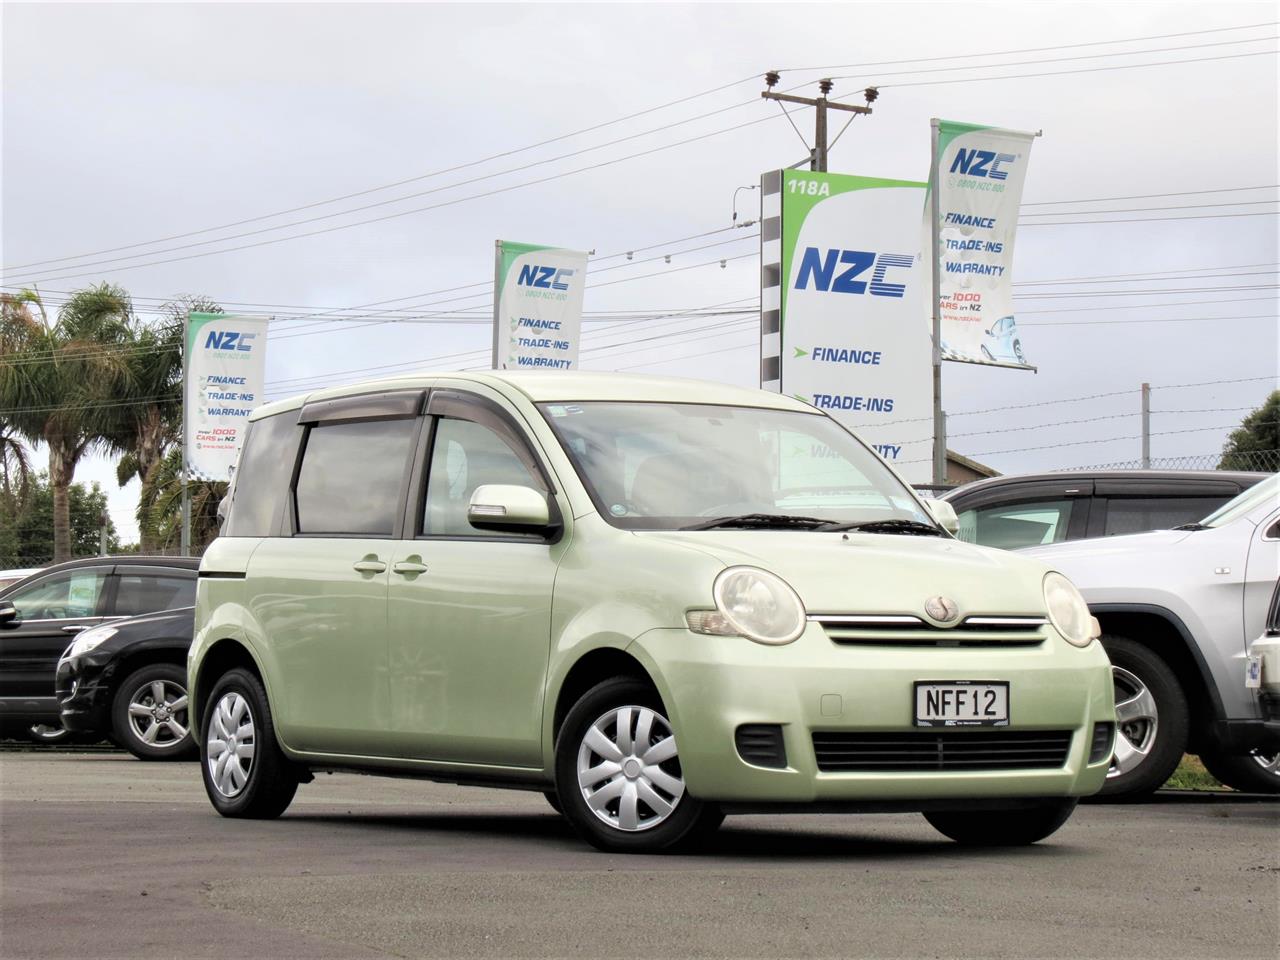 NZC 2009 Toyota Sienta just arrived to Auckland